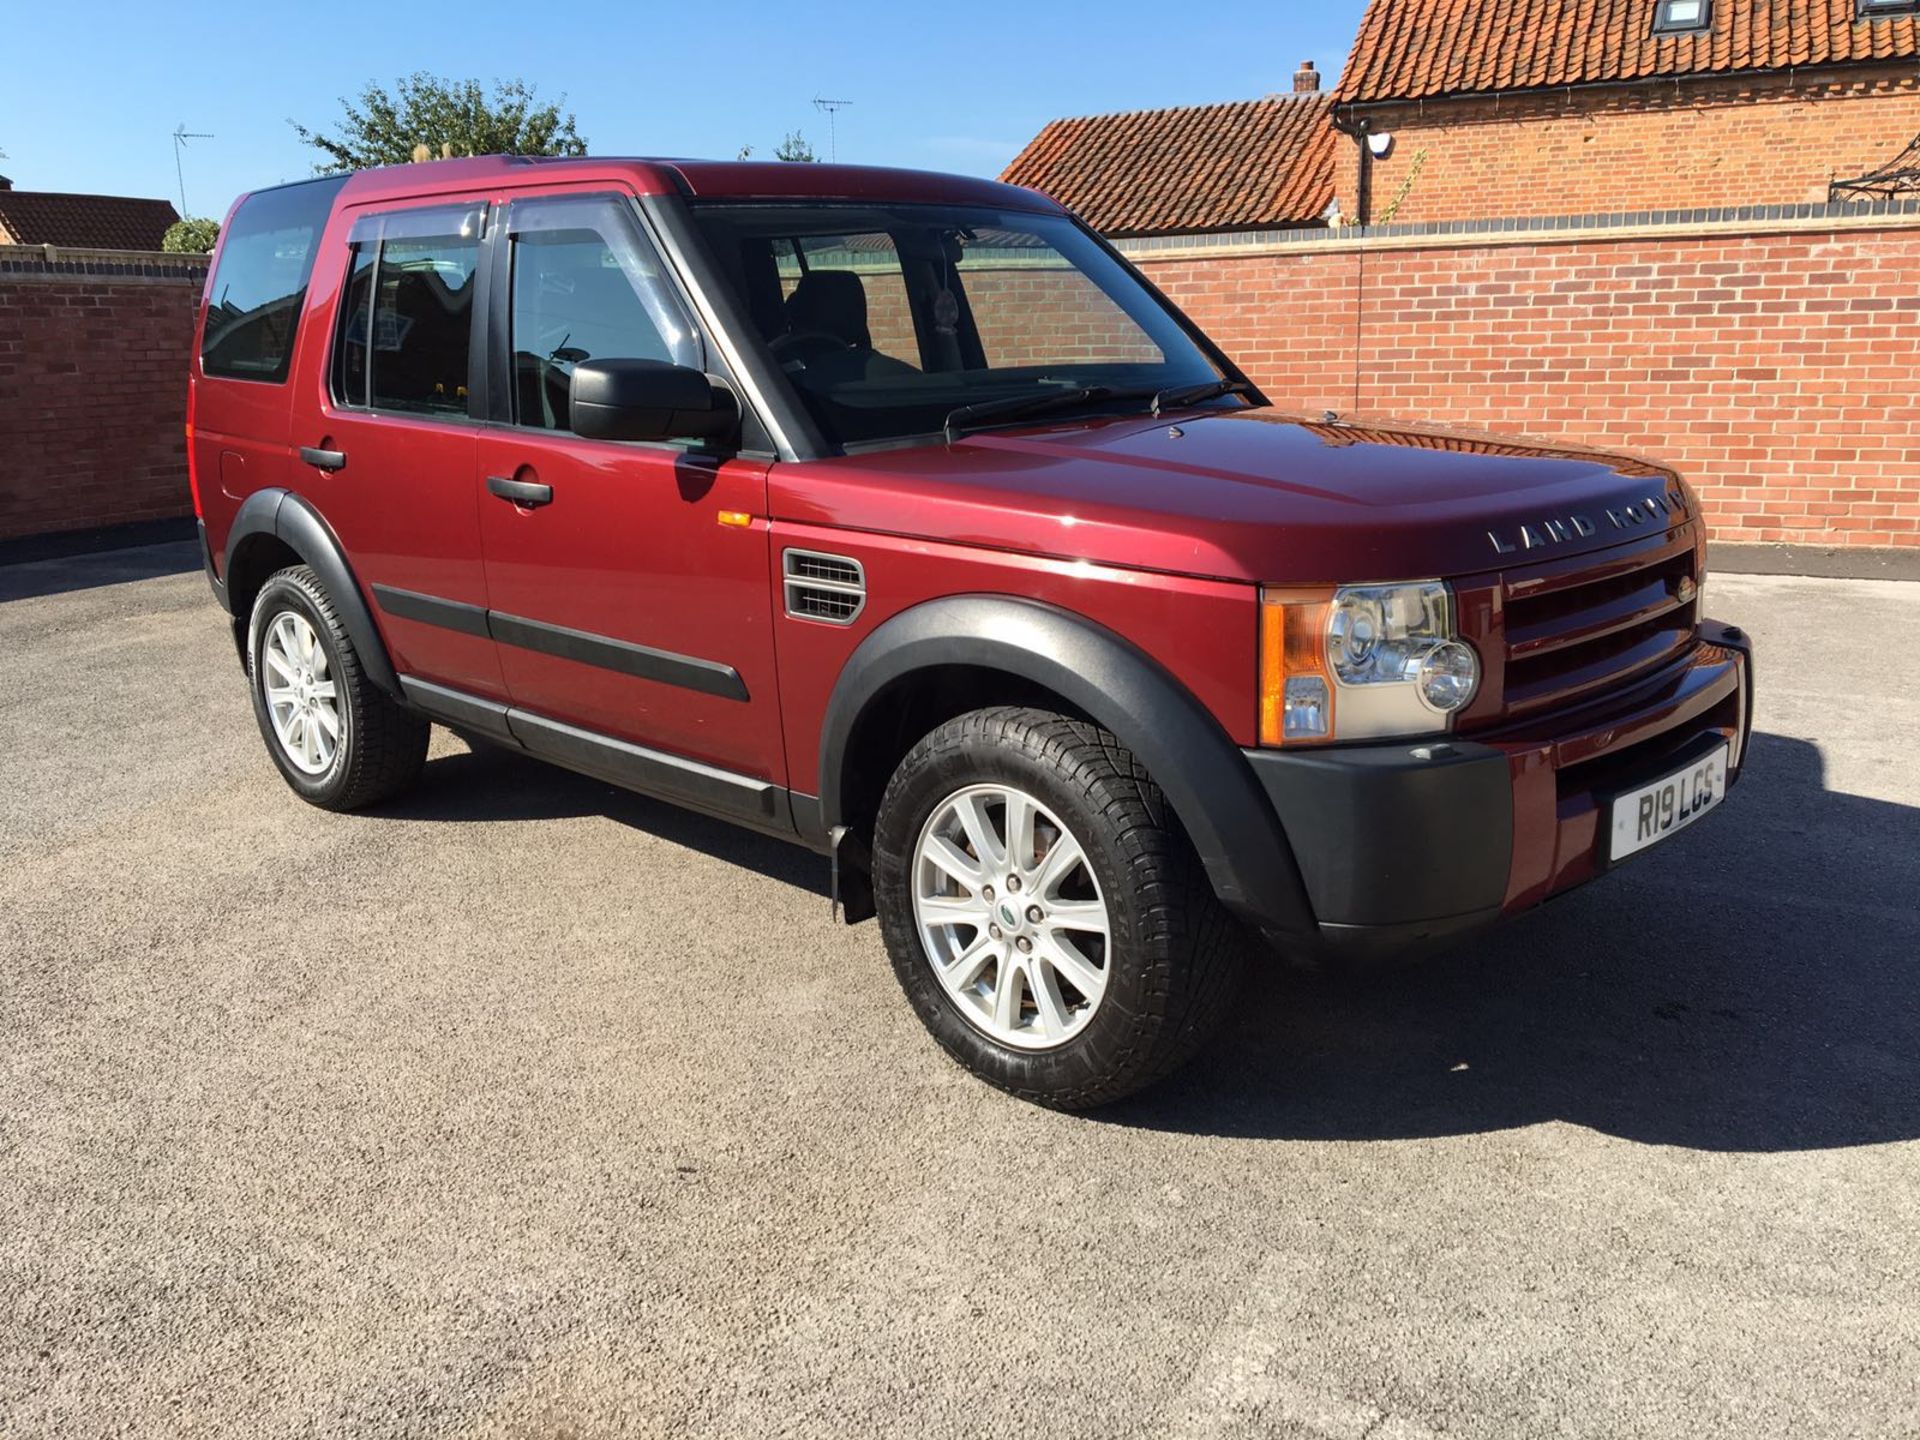 2005/54 REG LAND ROVER DISCOVERY 3 TDV6 S 7 SEATER - 1 FORMER KEEPER *NO VAT*